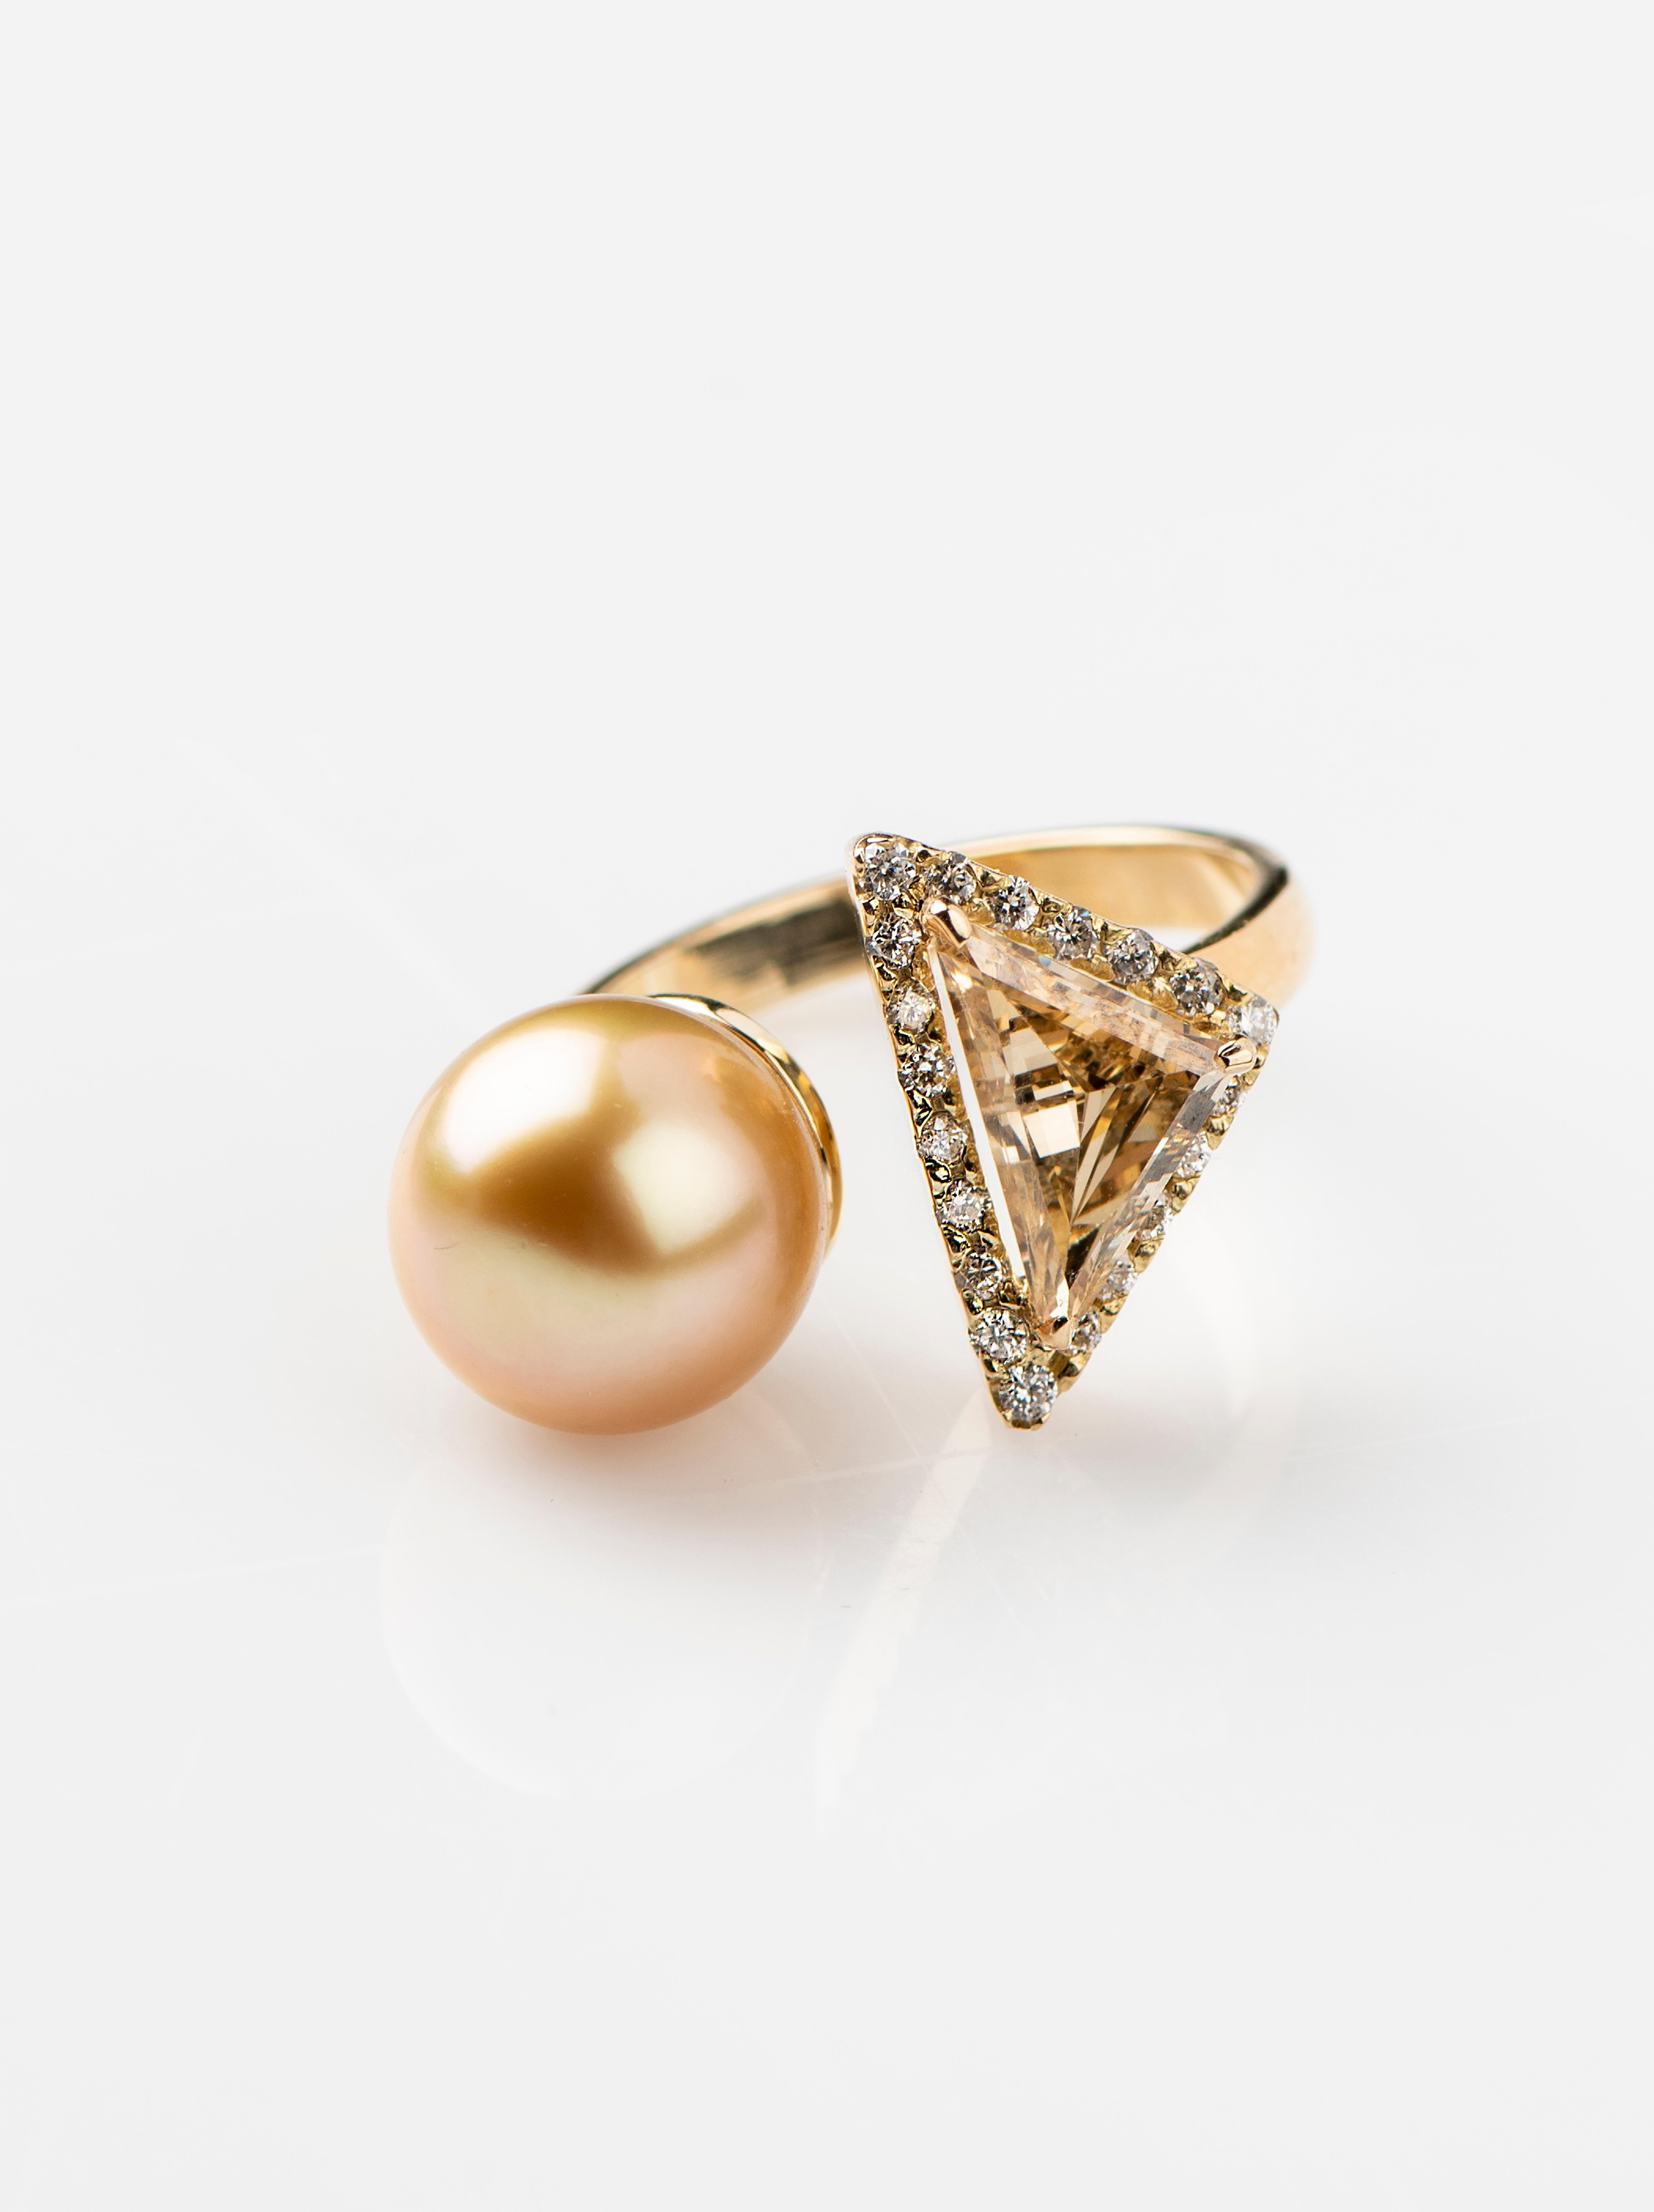 Contemporary 1.31ct Fancy Diamond and Golden South Sea Pearl Ring For Sale